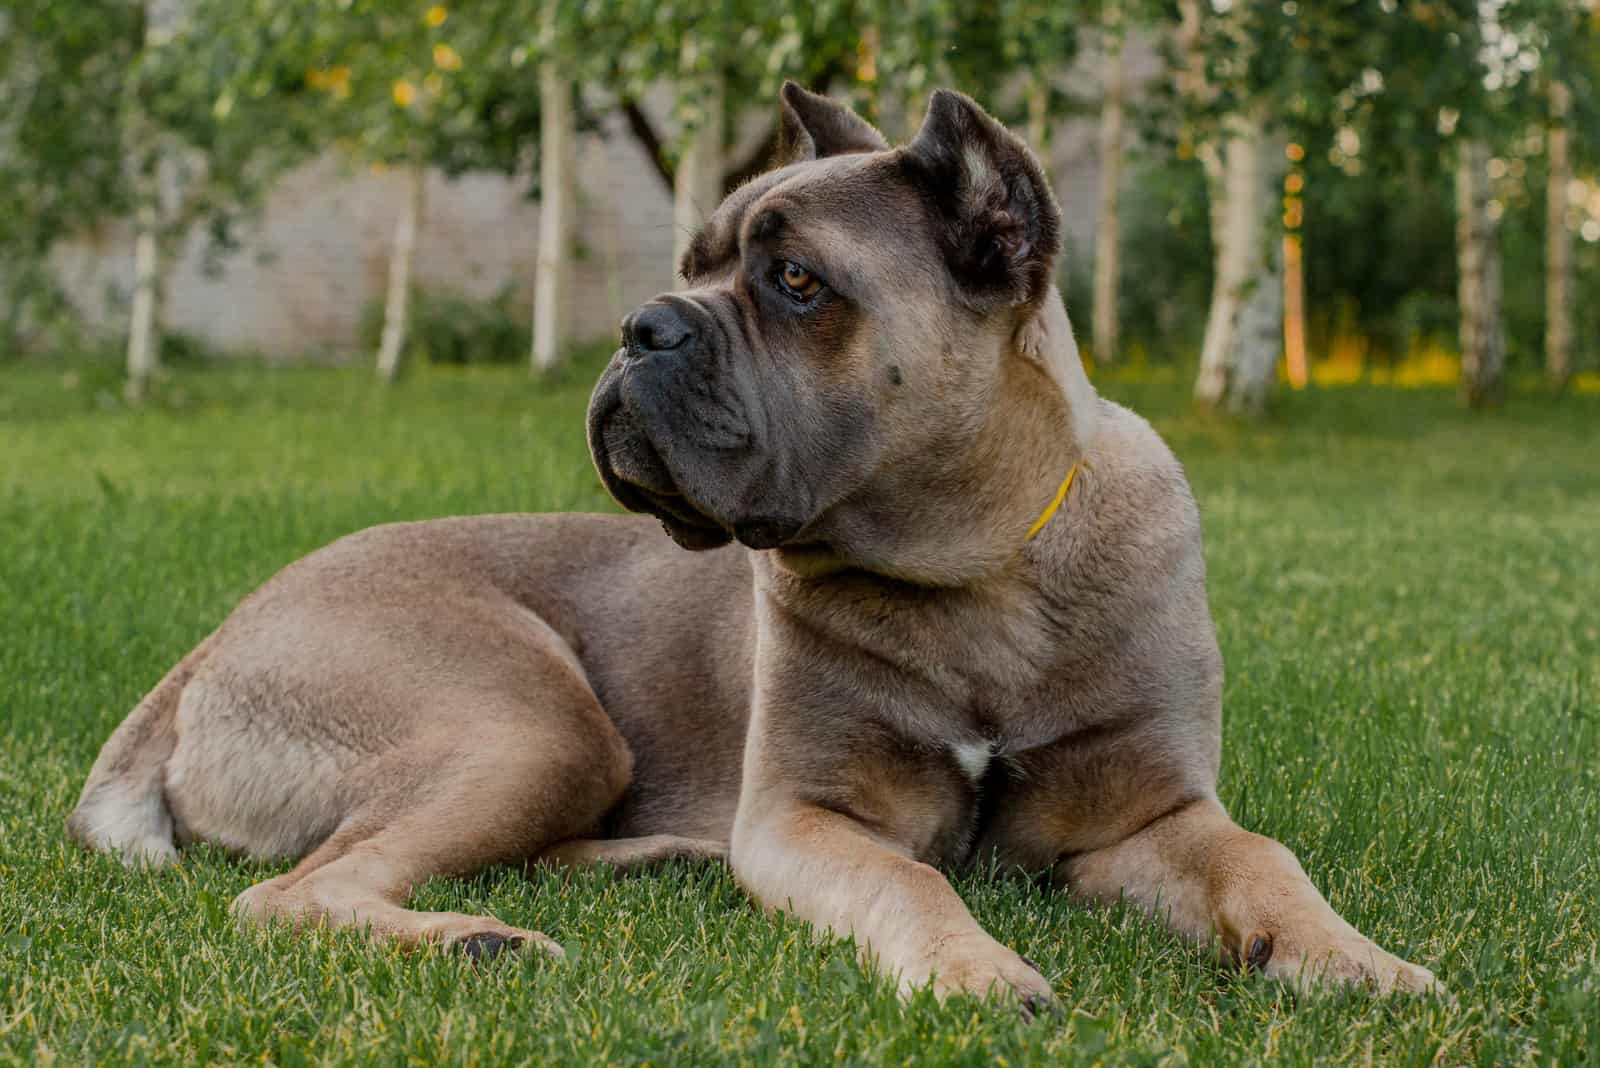 Formentino Cane Corso: What You Need To Know Before Buying